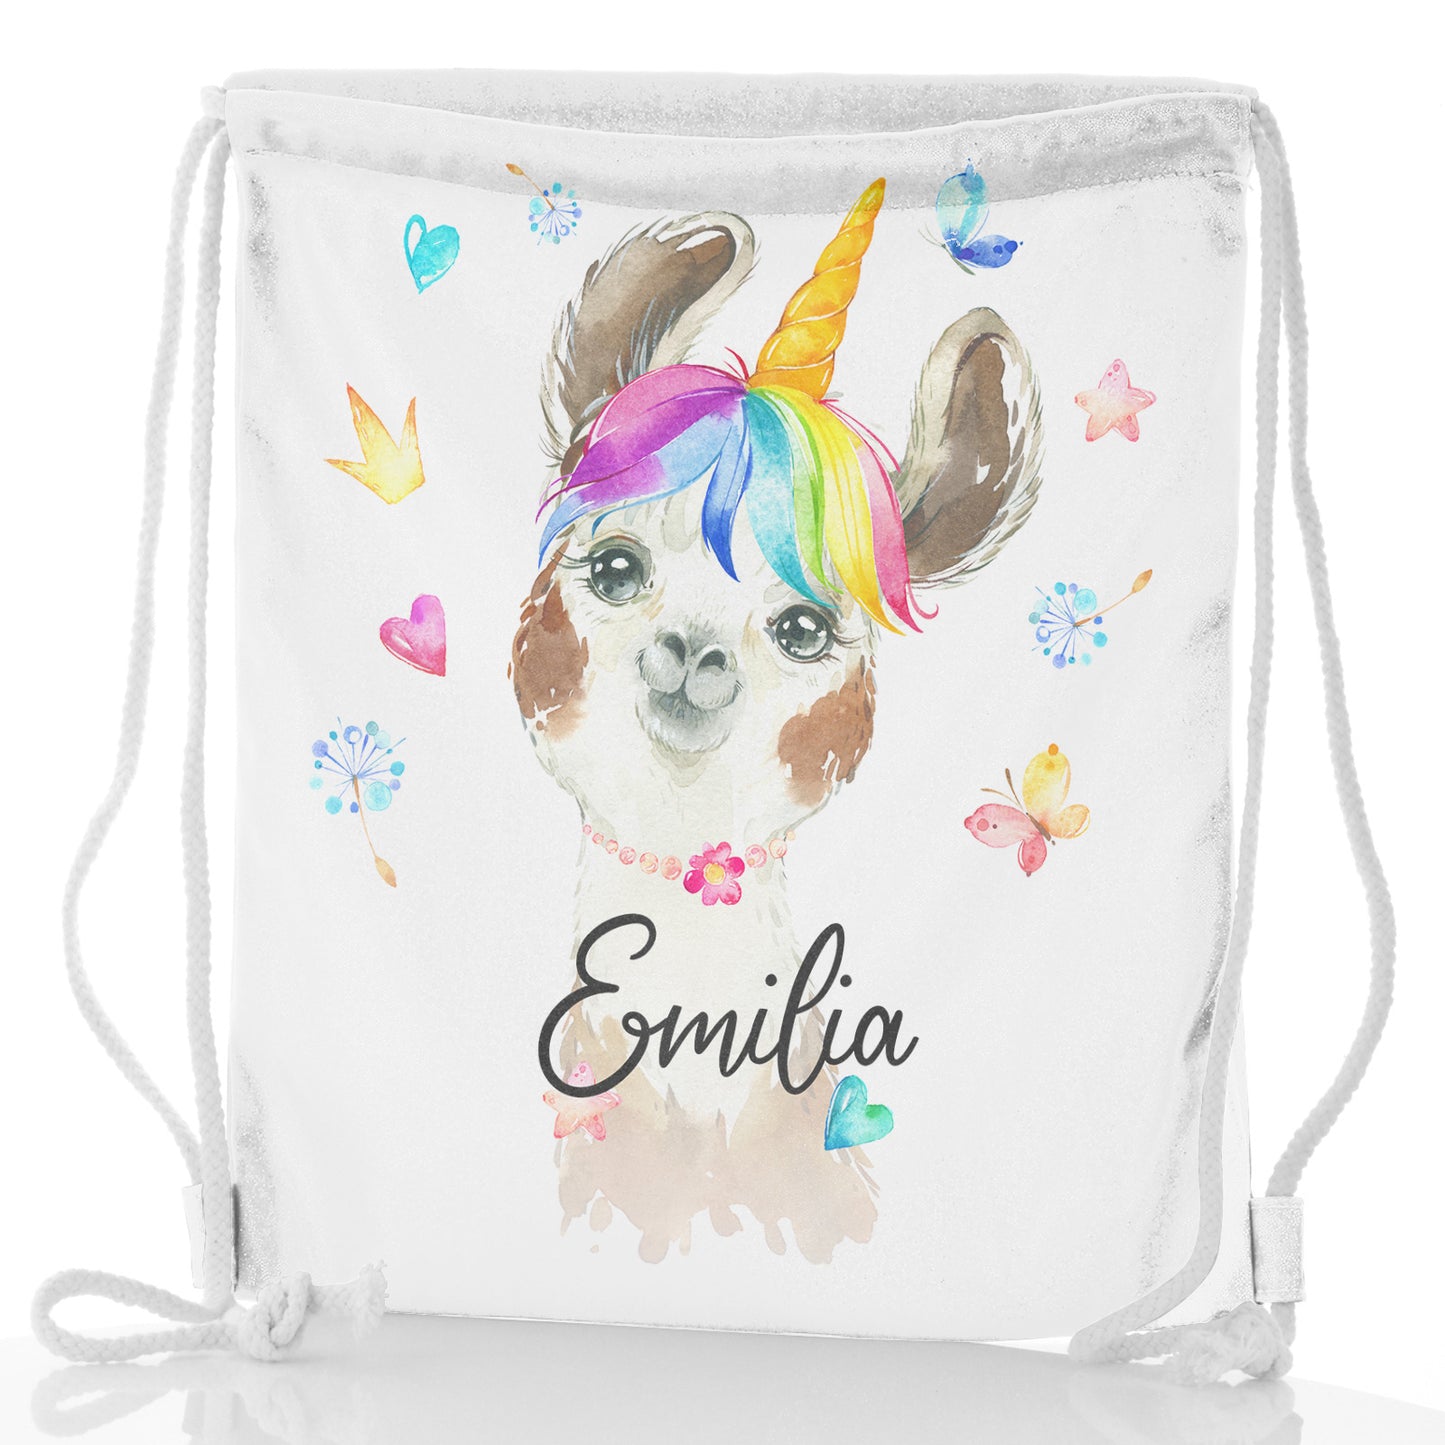 Personalised Glitter Drawstring Backpack with Alpaca Unicorn with Rainbow Hair Hearts Stars and Cute Text